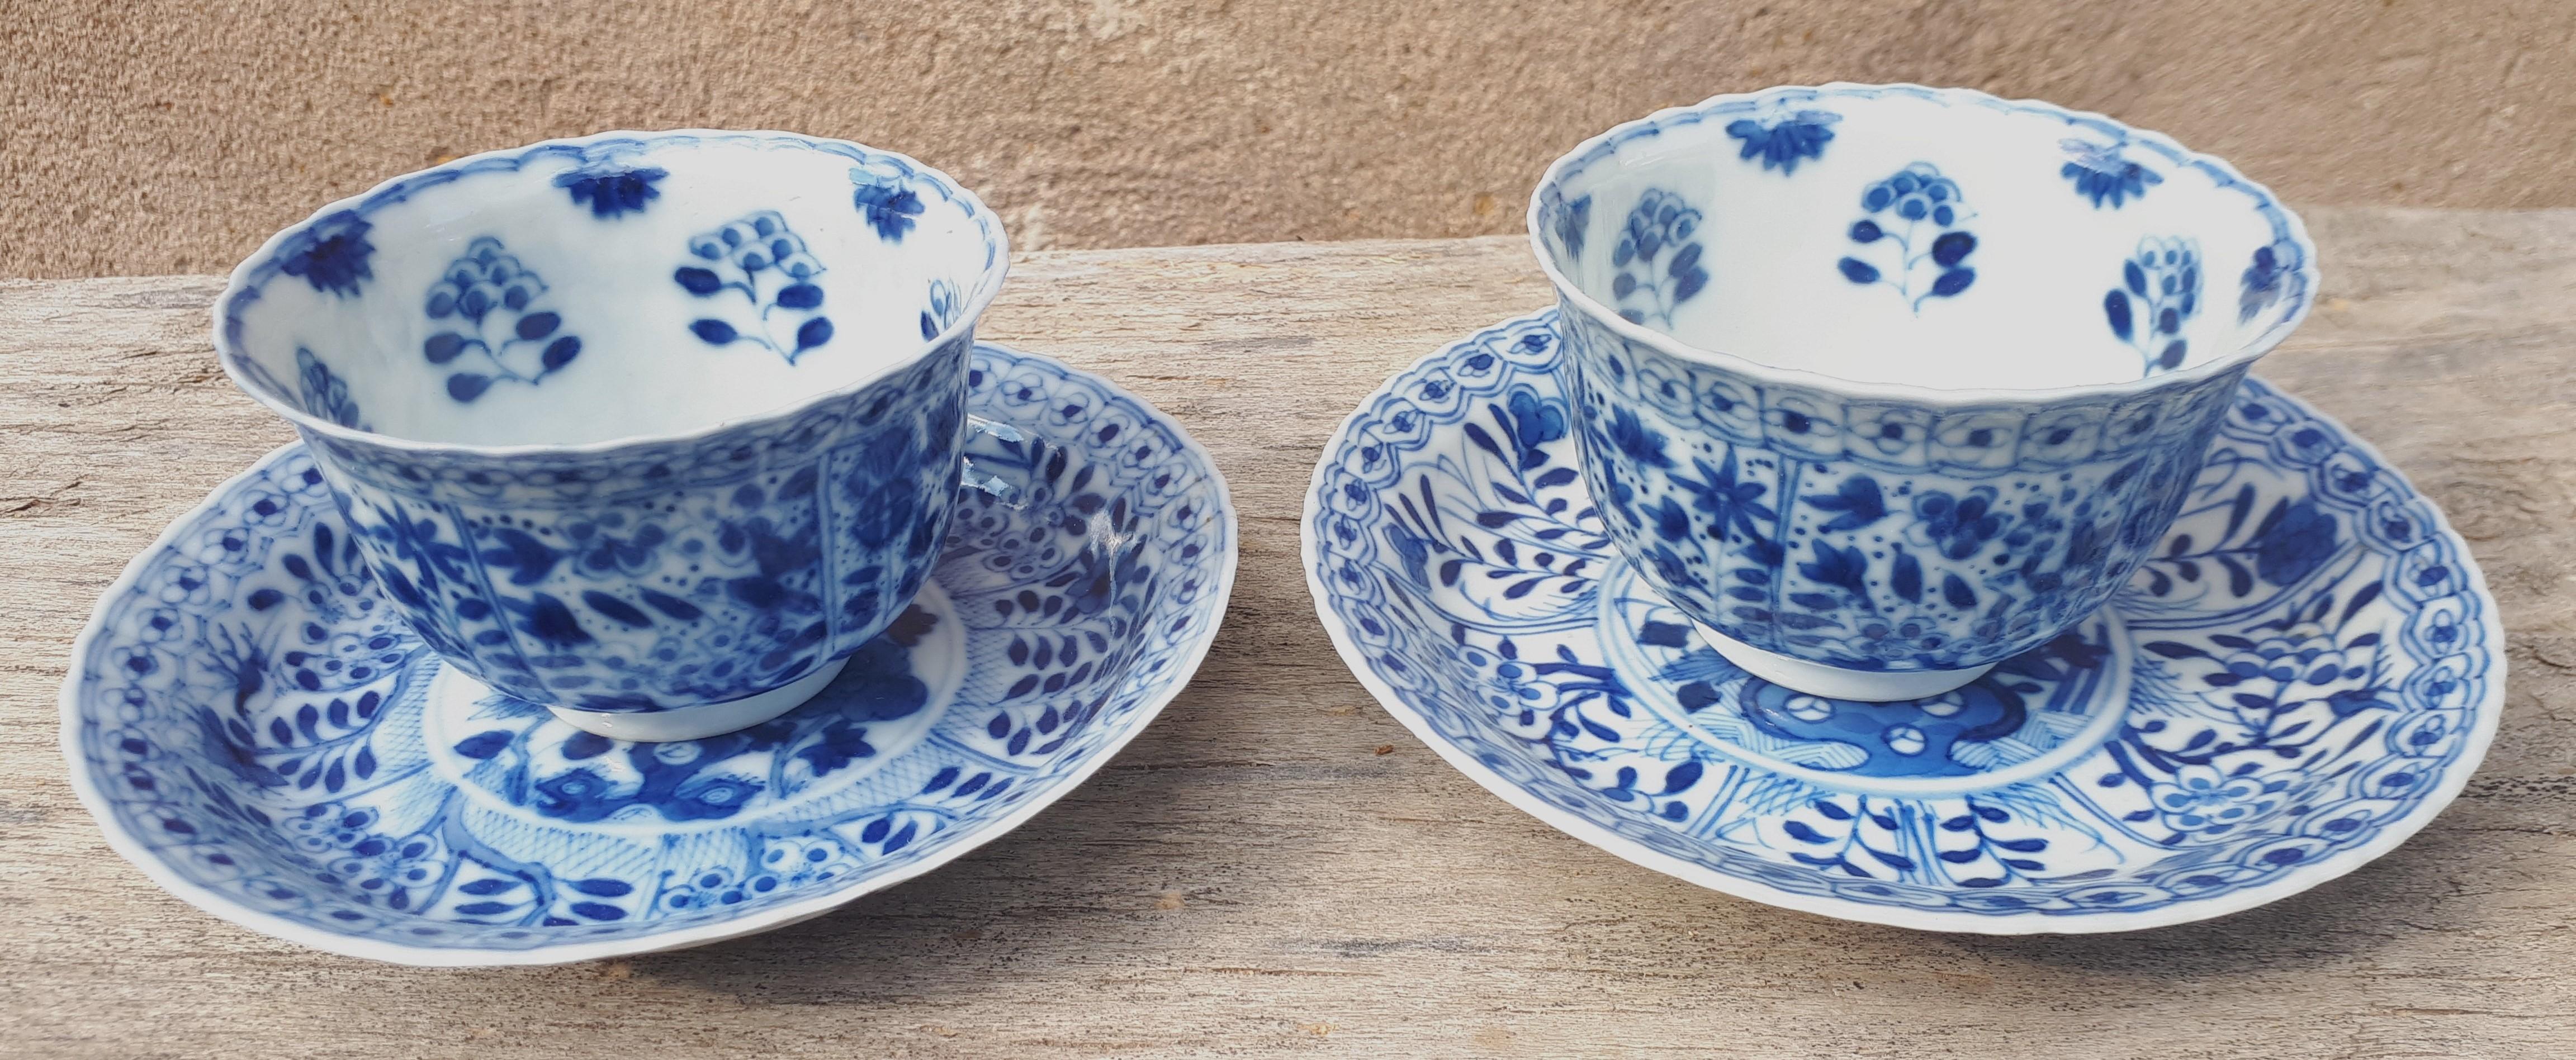 17th Century Pair Of Chinese Blue And White Cups And Saucers, China Kangxi Period For Sale